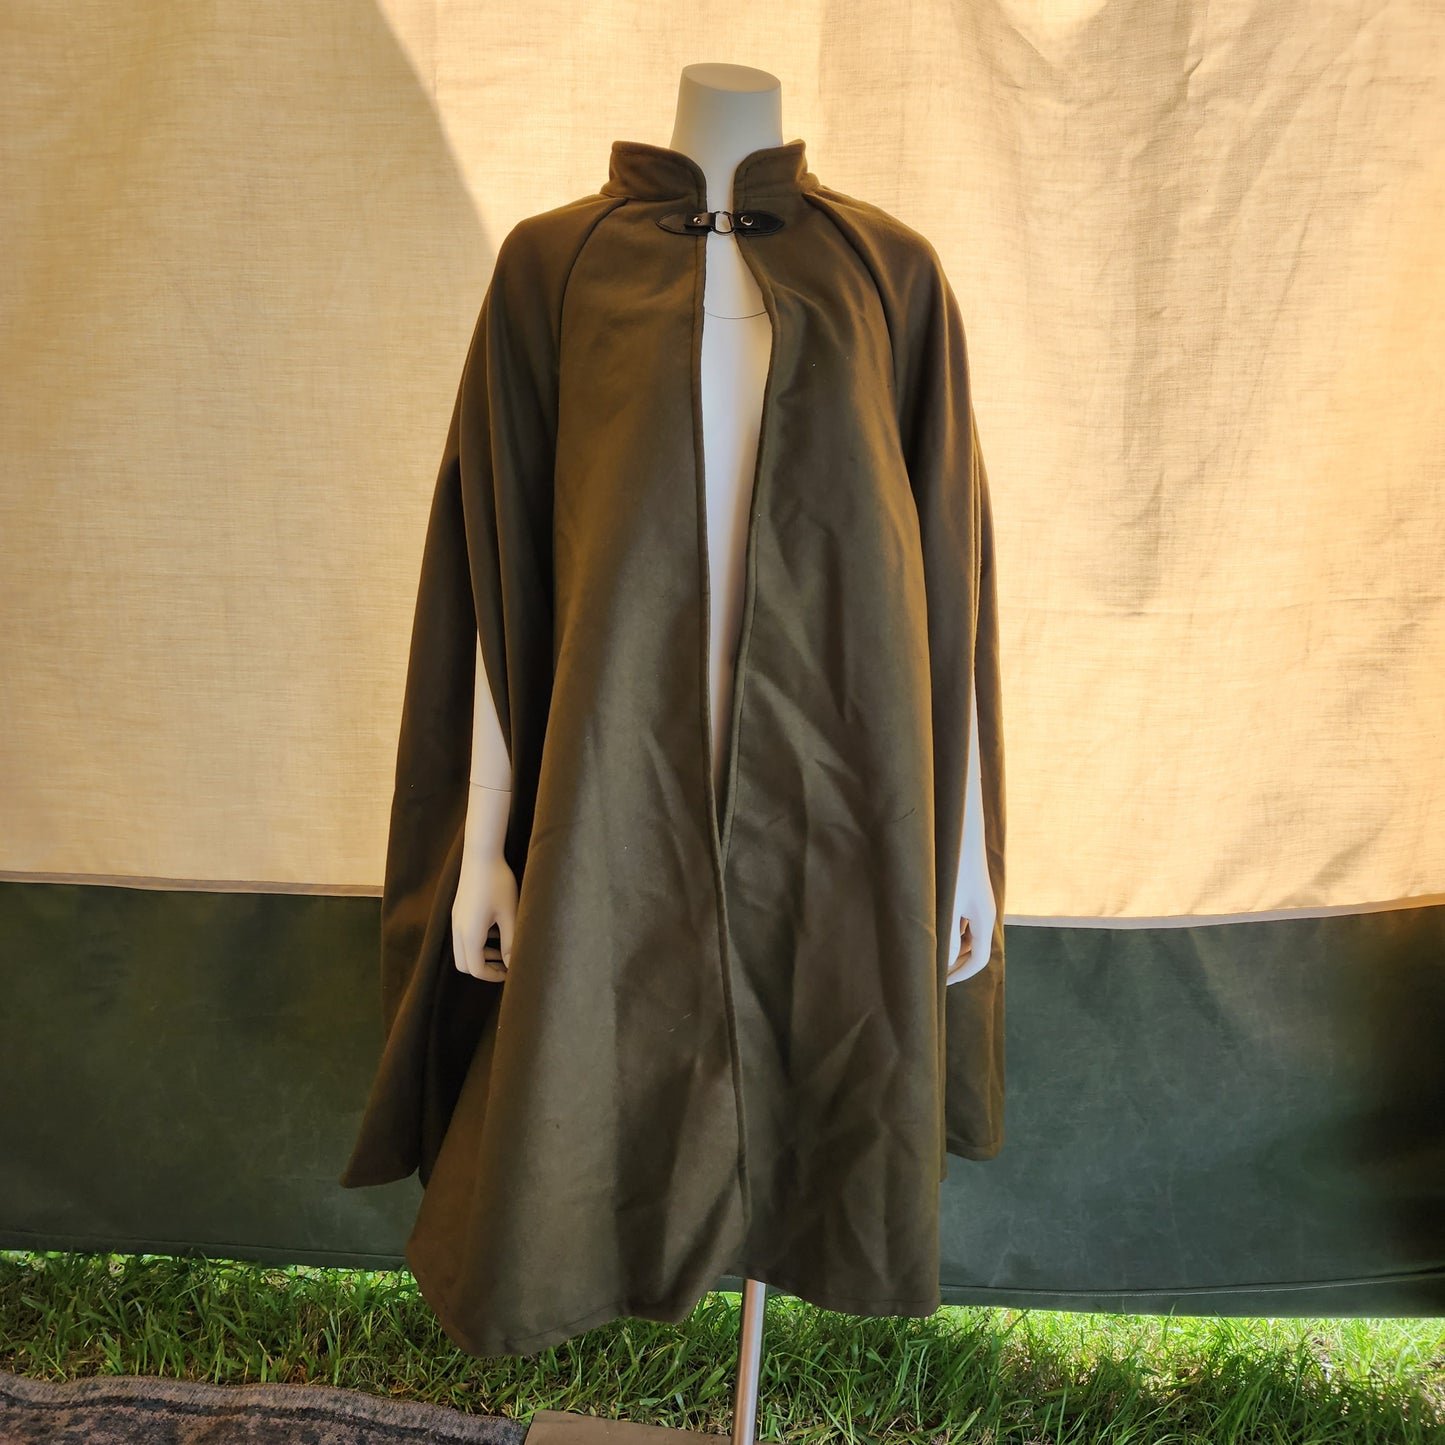 Market Day Cape- Olive Mid-Length Cape with Collar and Arm Slits